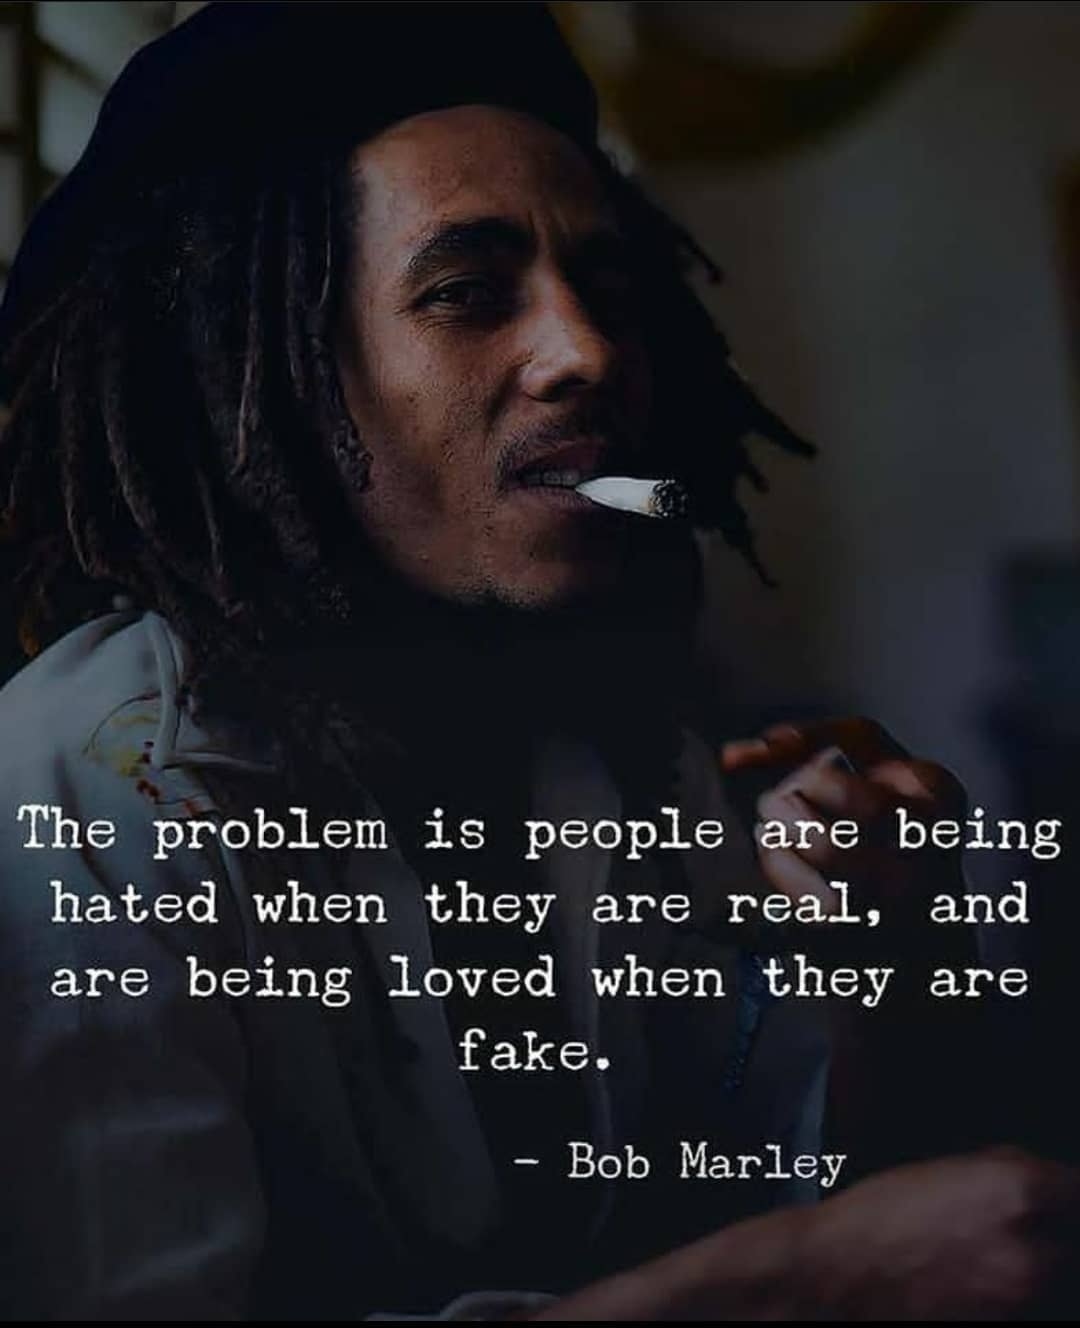 The problem is people are being hated when they are real, and are being loved when they are fake.